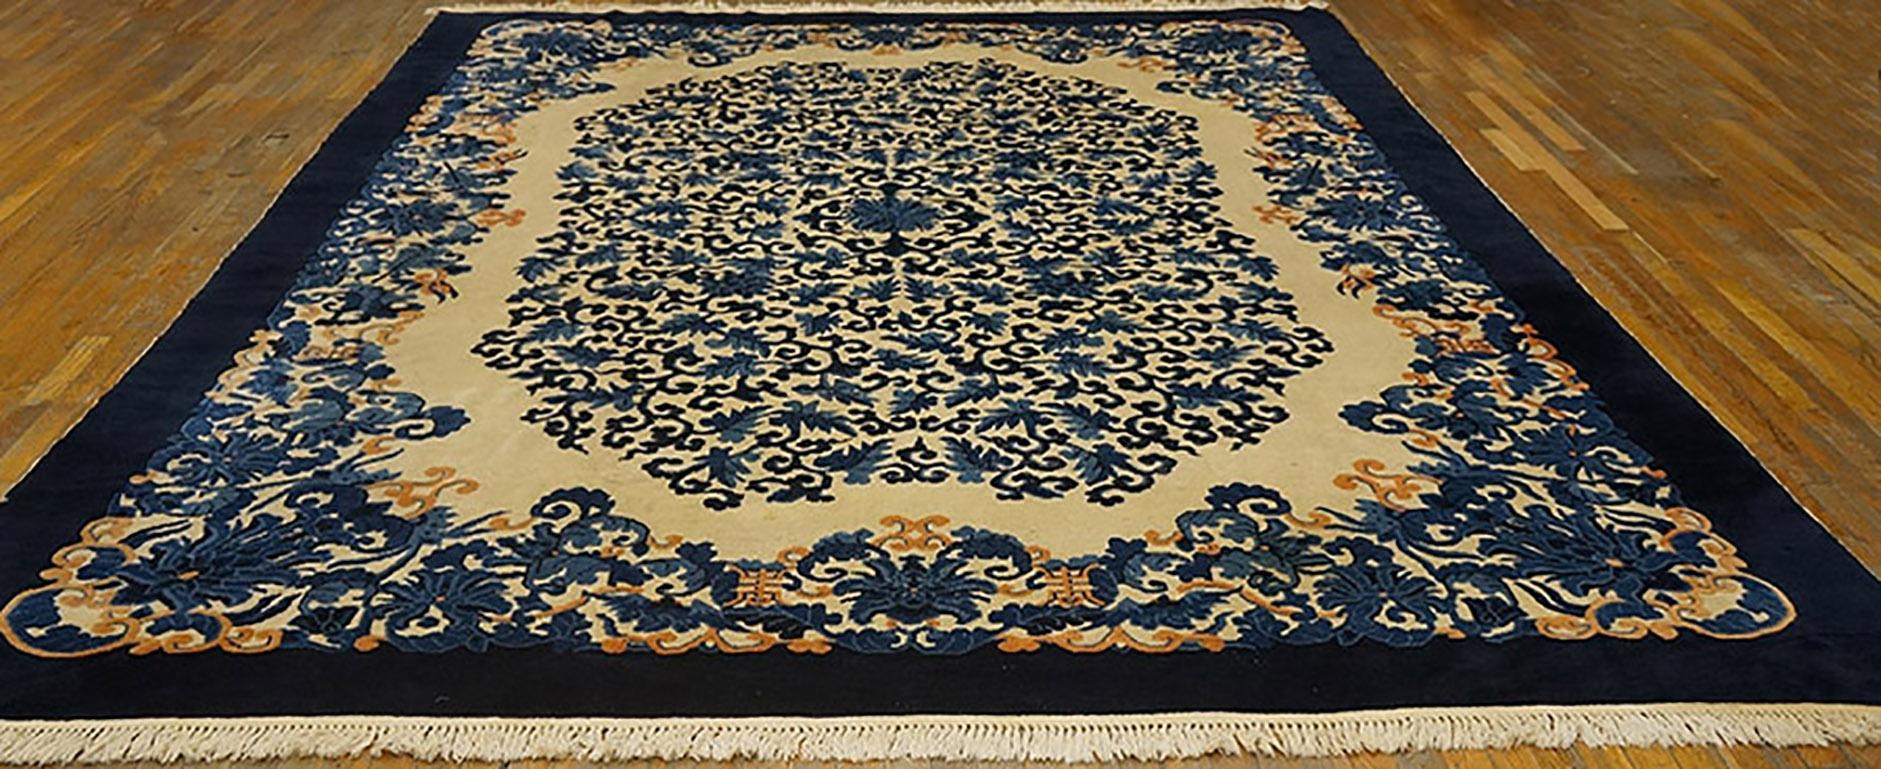 Other Antique Chinese Ningxia Rug